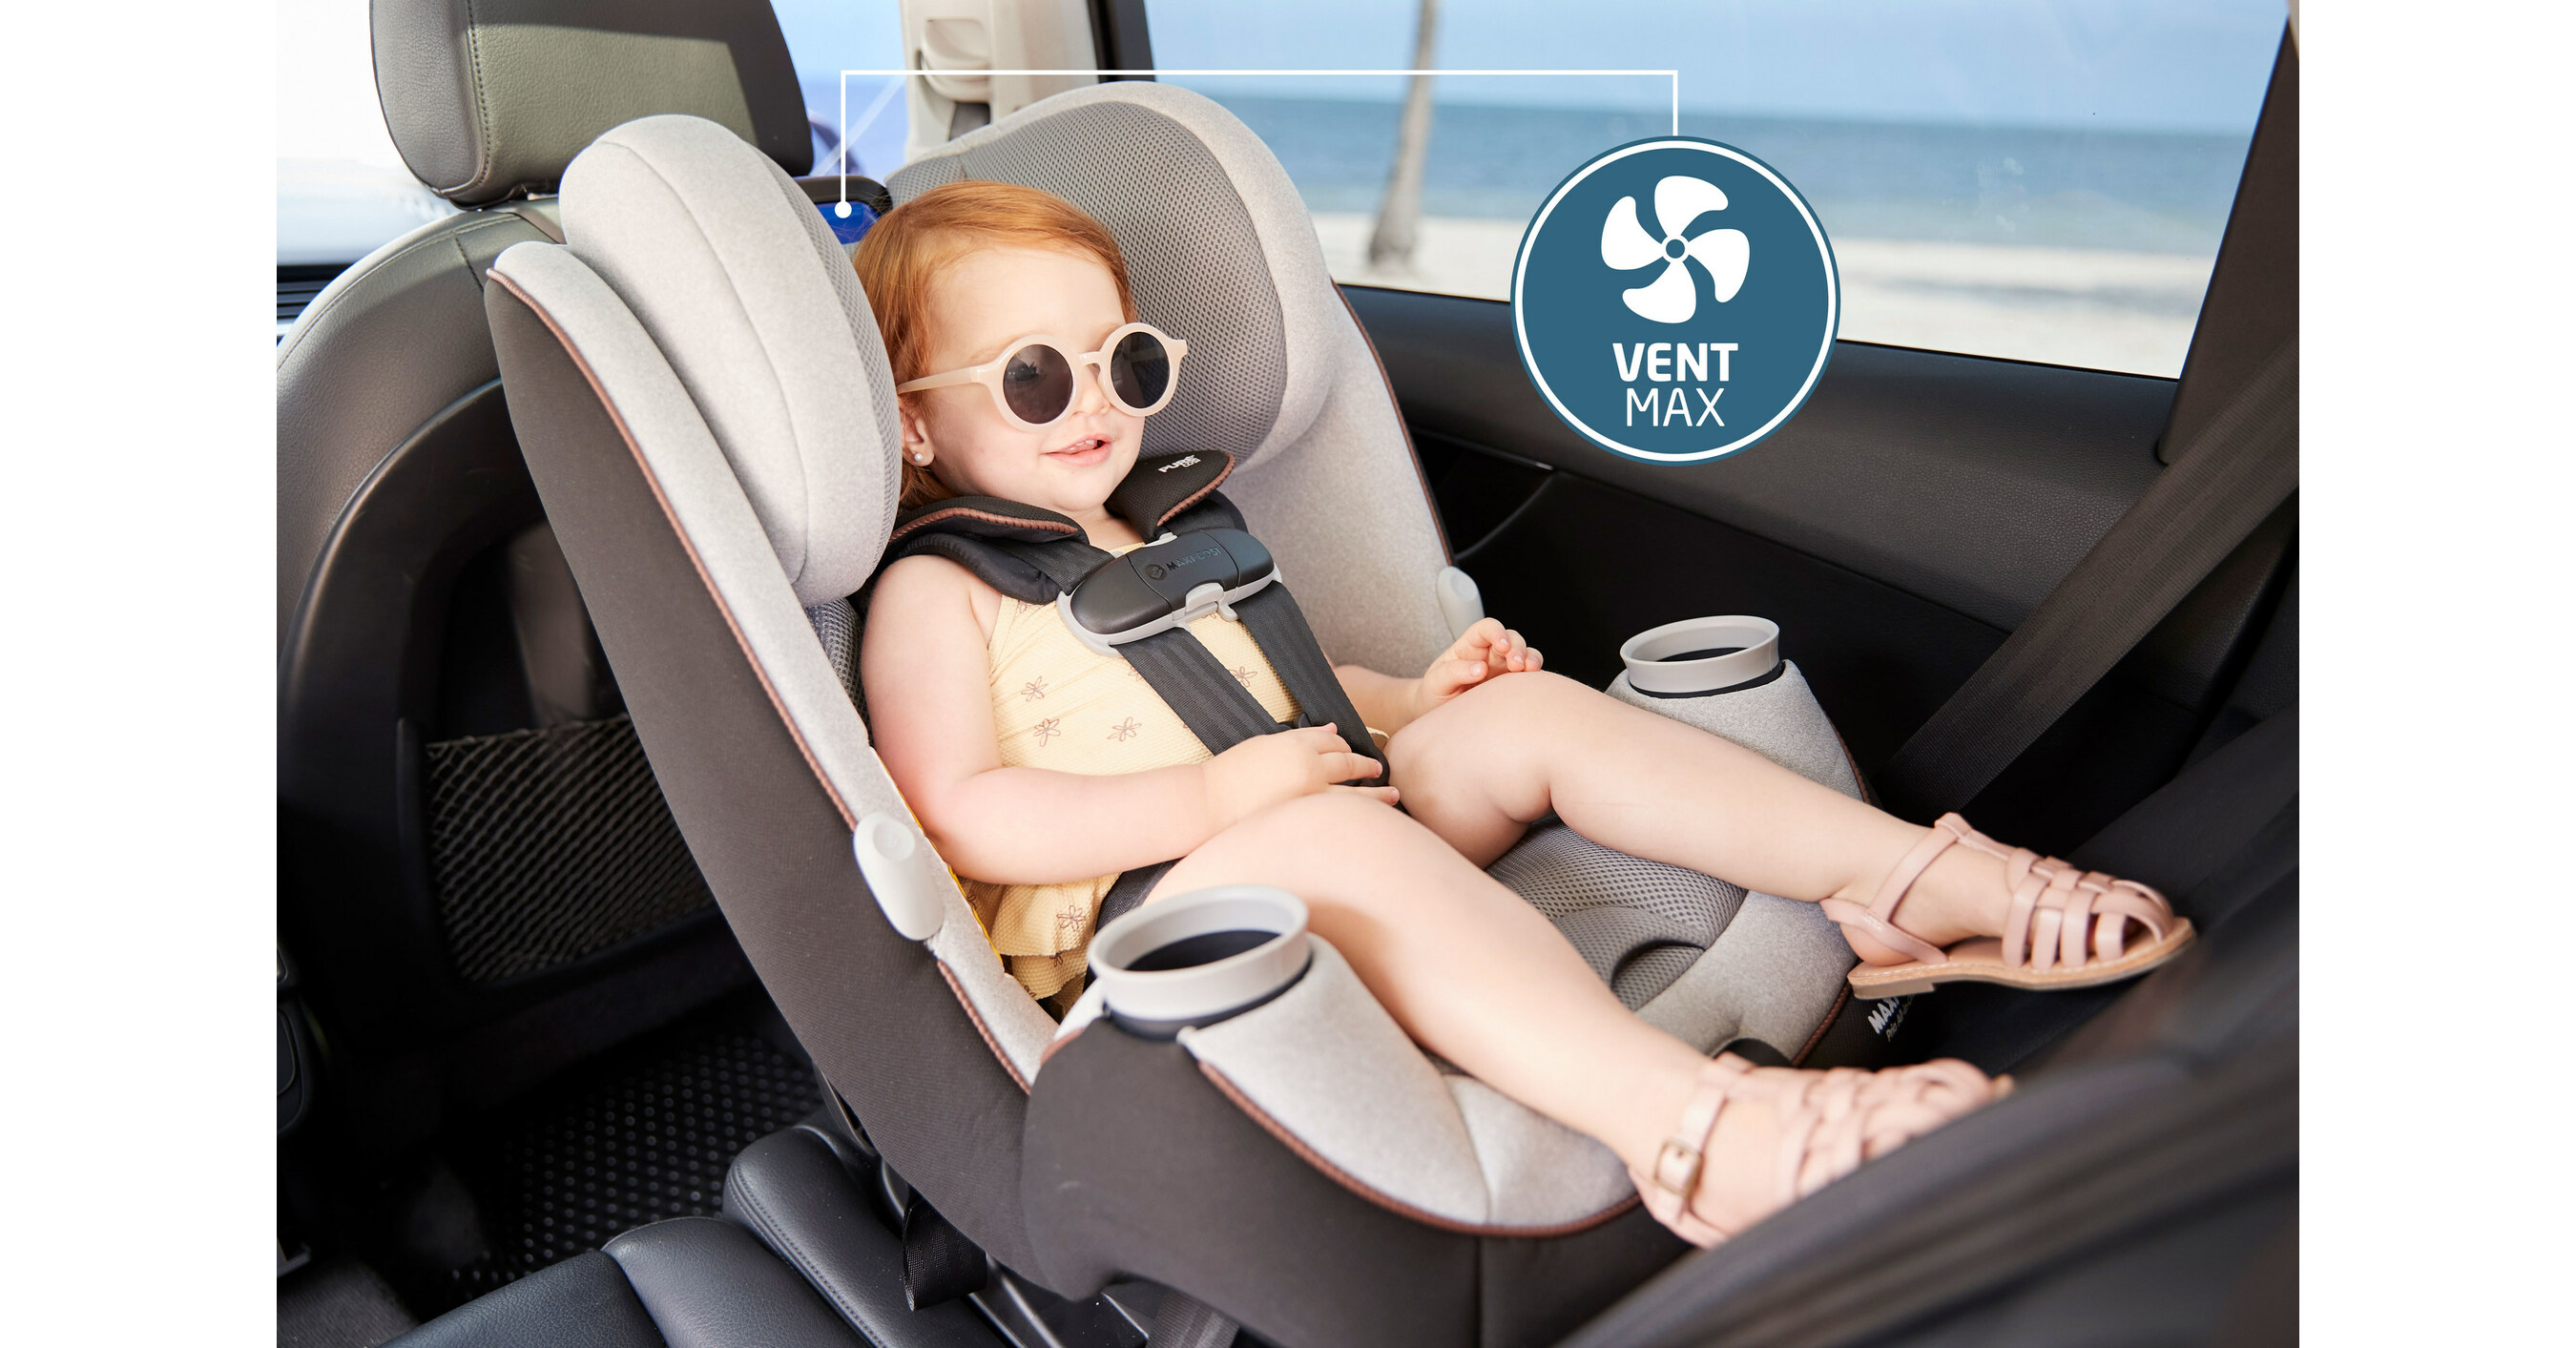 Maxi-Cosi® Introduces Two Innovative New Car Seats Live from ABC Kids Expo